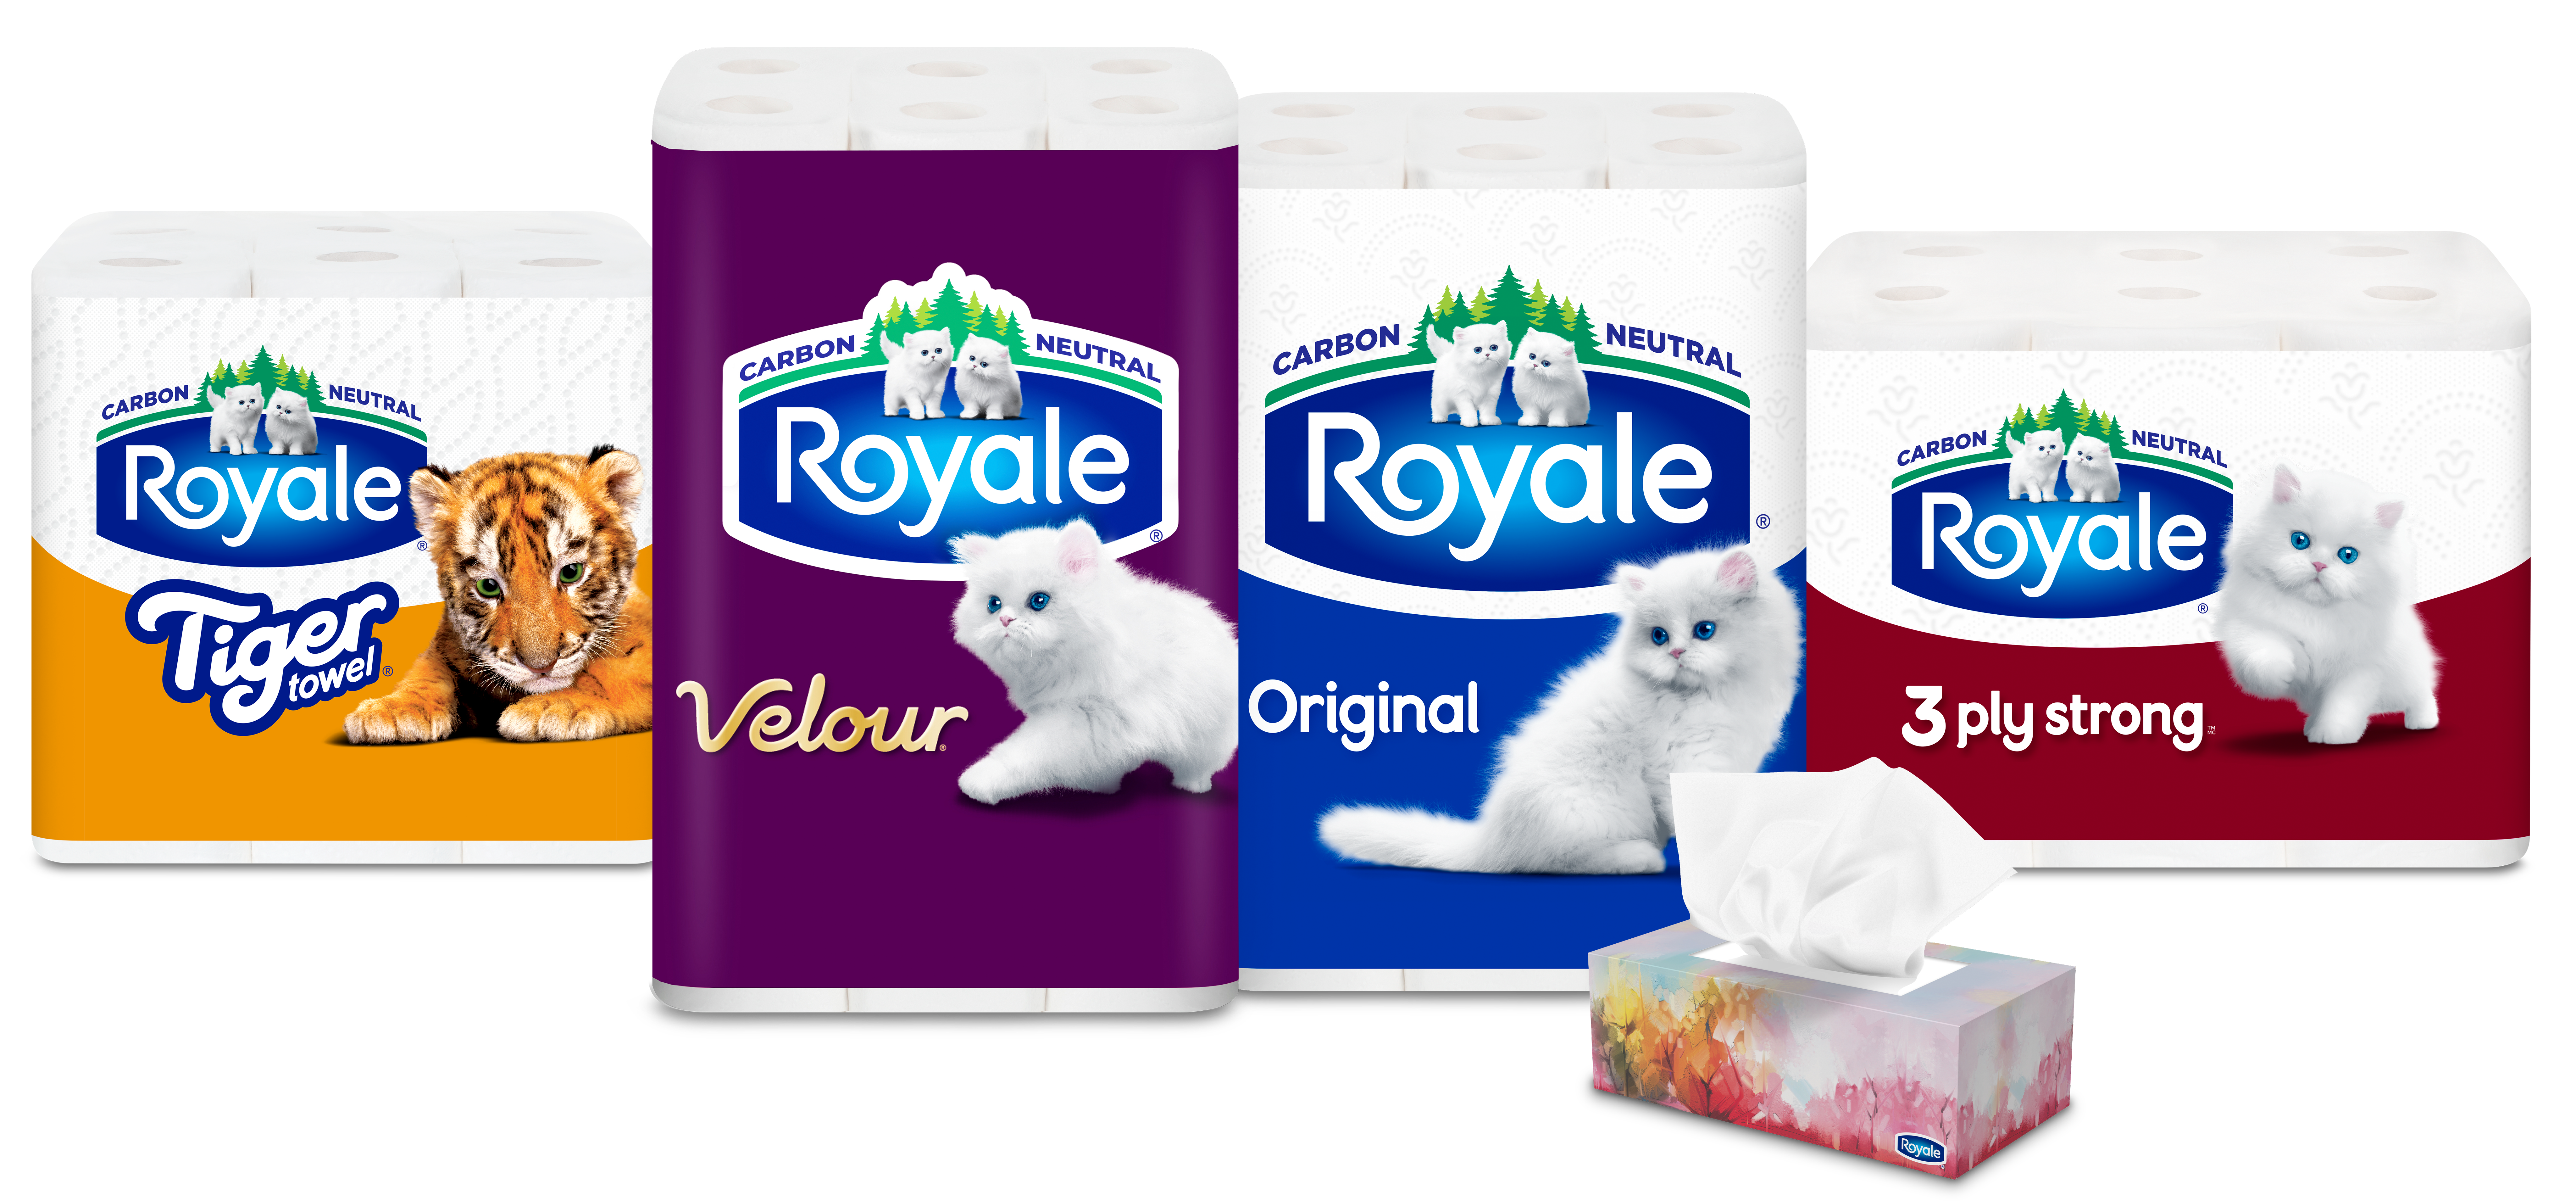 Royale product pack